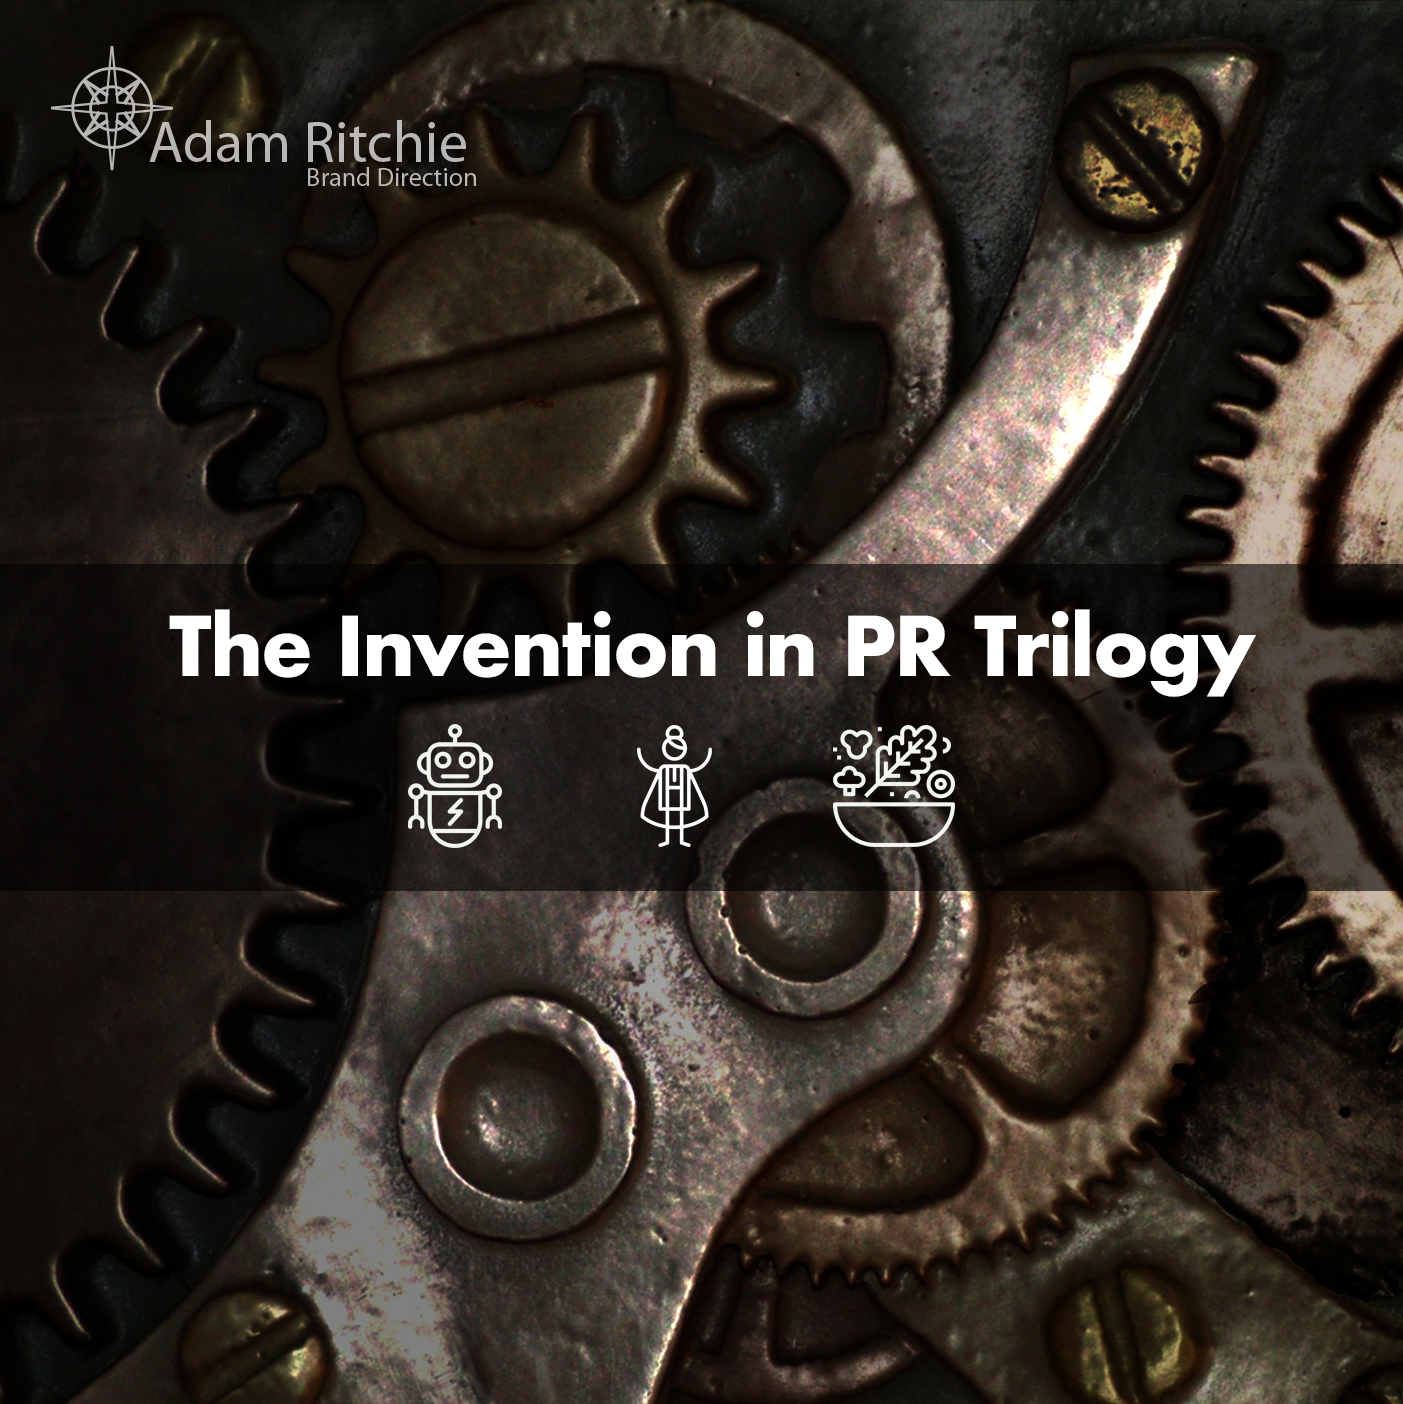 The Invention in PR Trilogy by Adam Ritchie Brand Direction